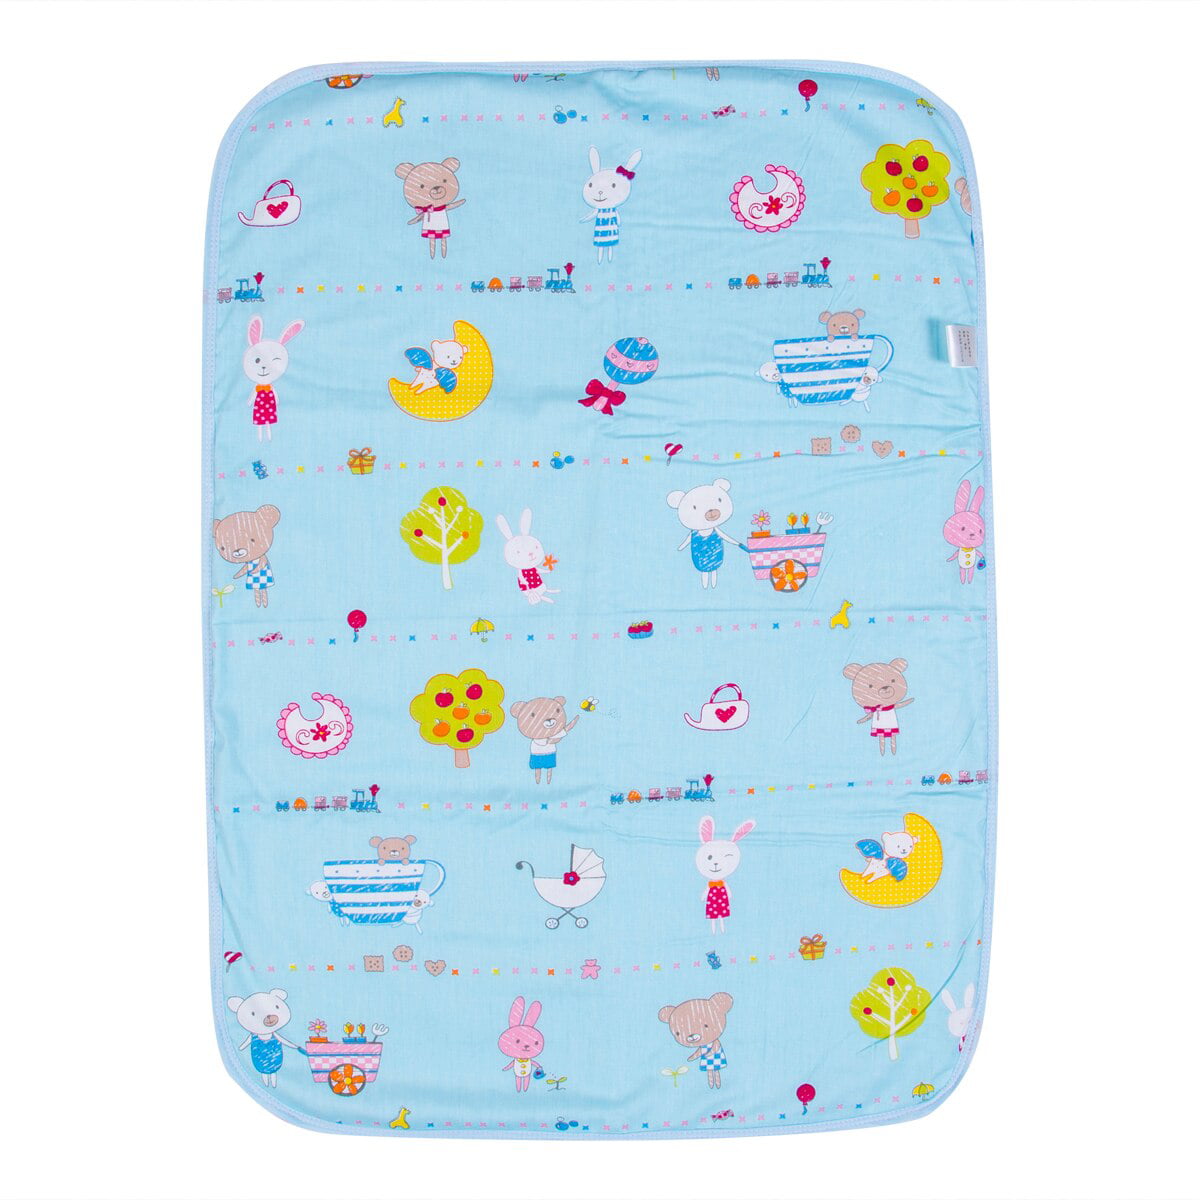 Baby Infant Waterproof Urine Mat Diaper Nappy Kid Bedding Changing Cover_Pad BH 